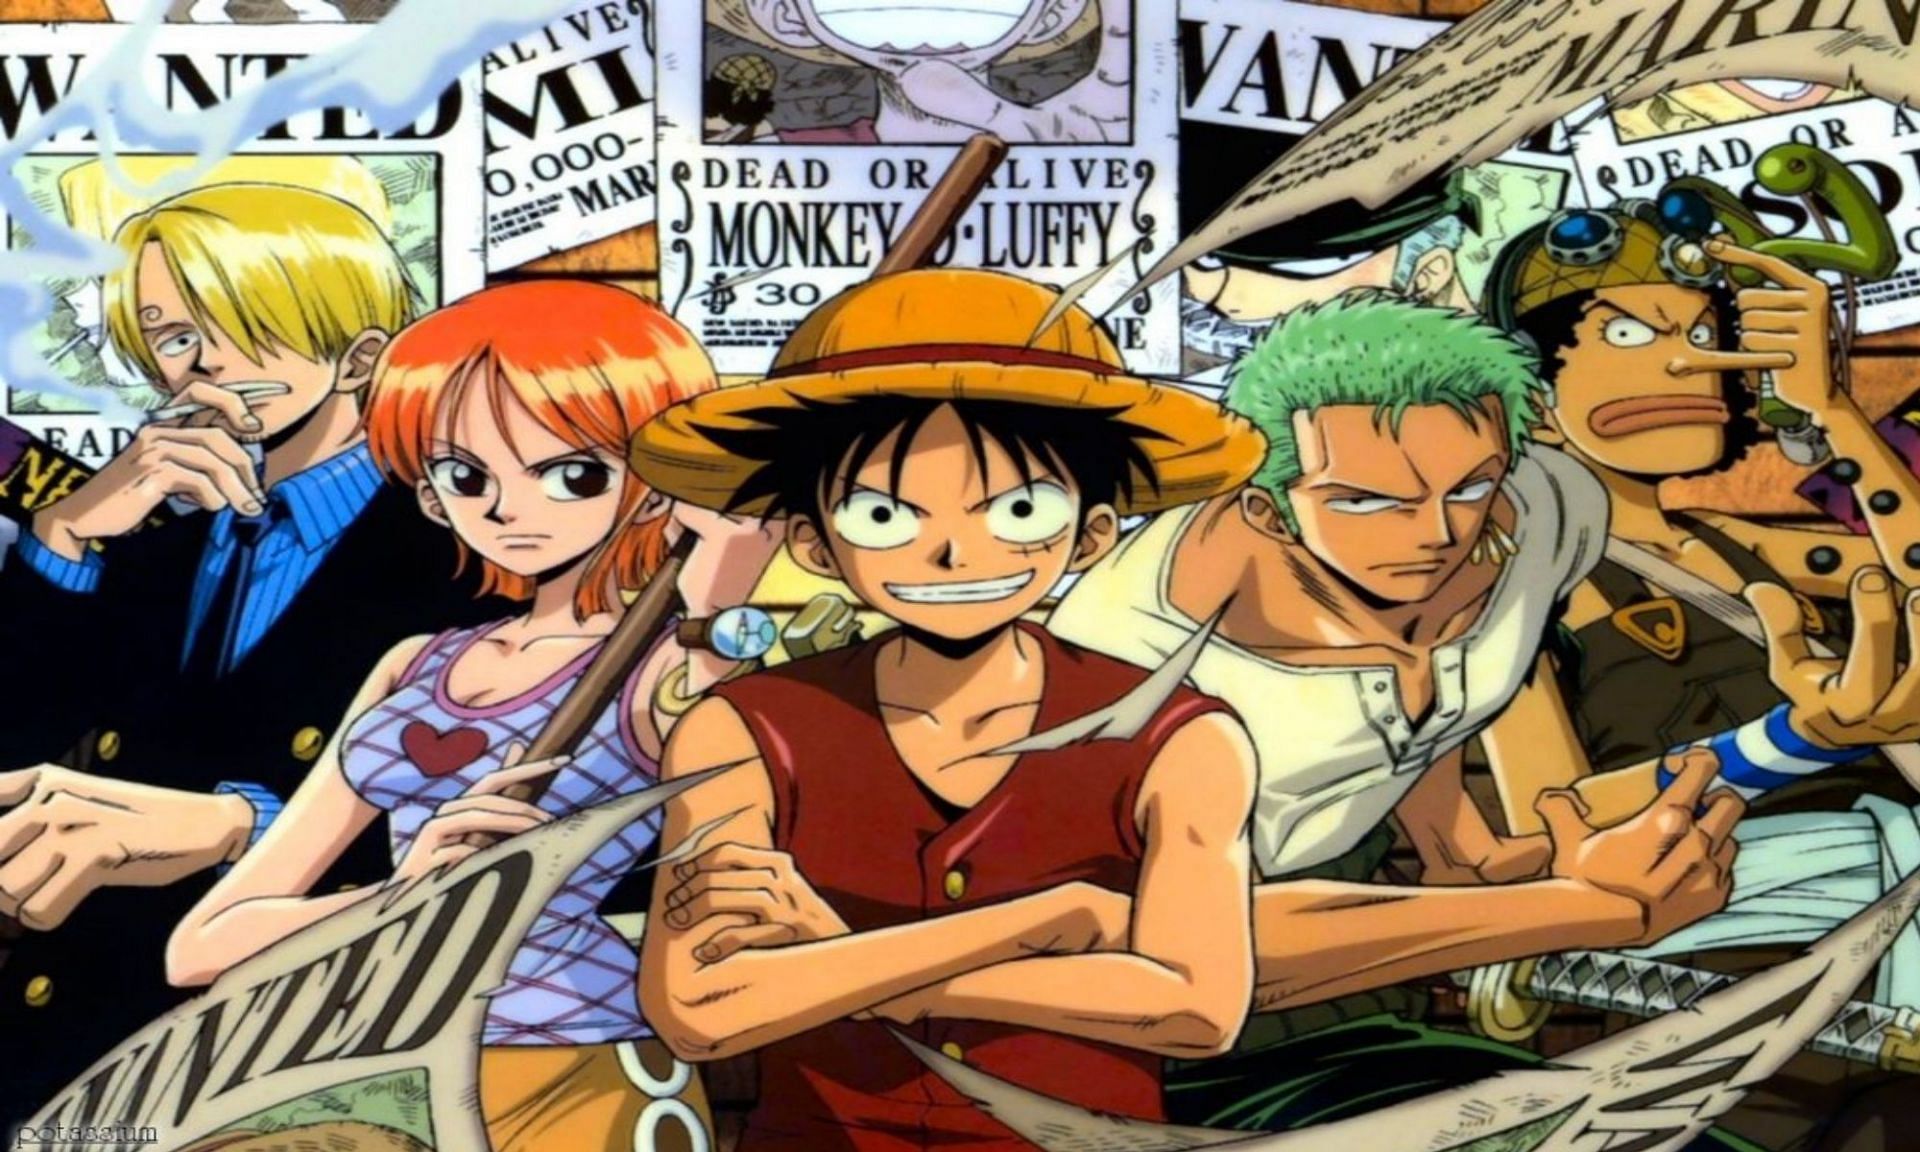 The original Straw Hat crew from the East Blue saga